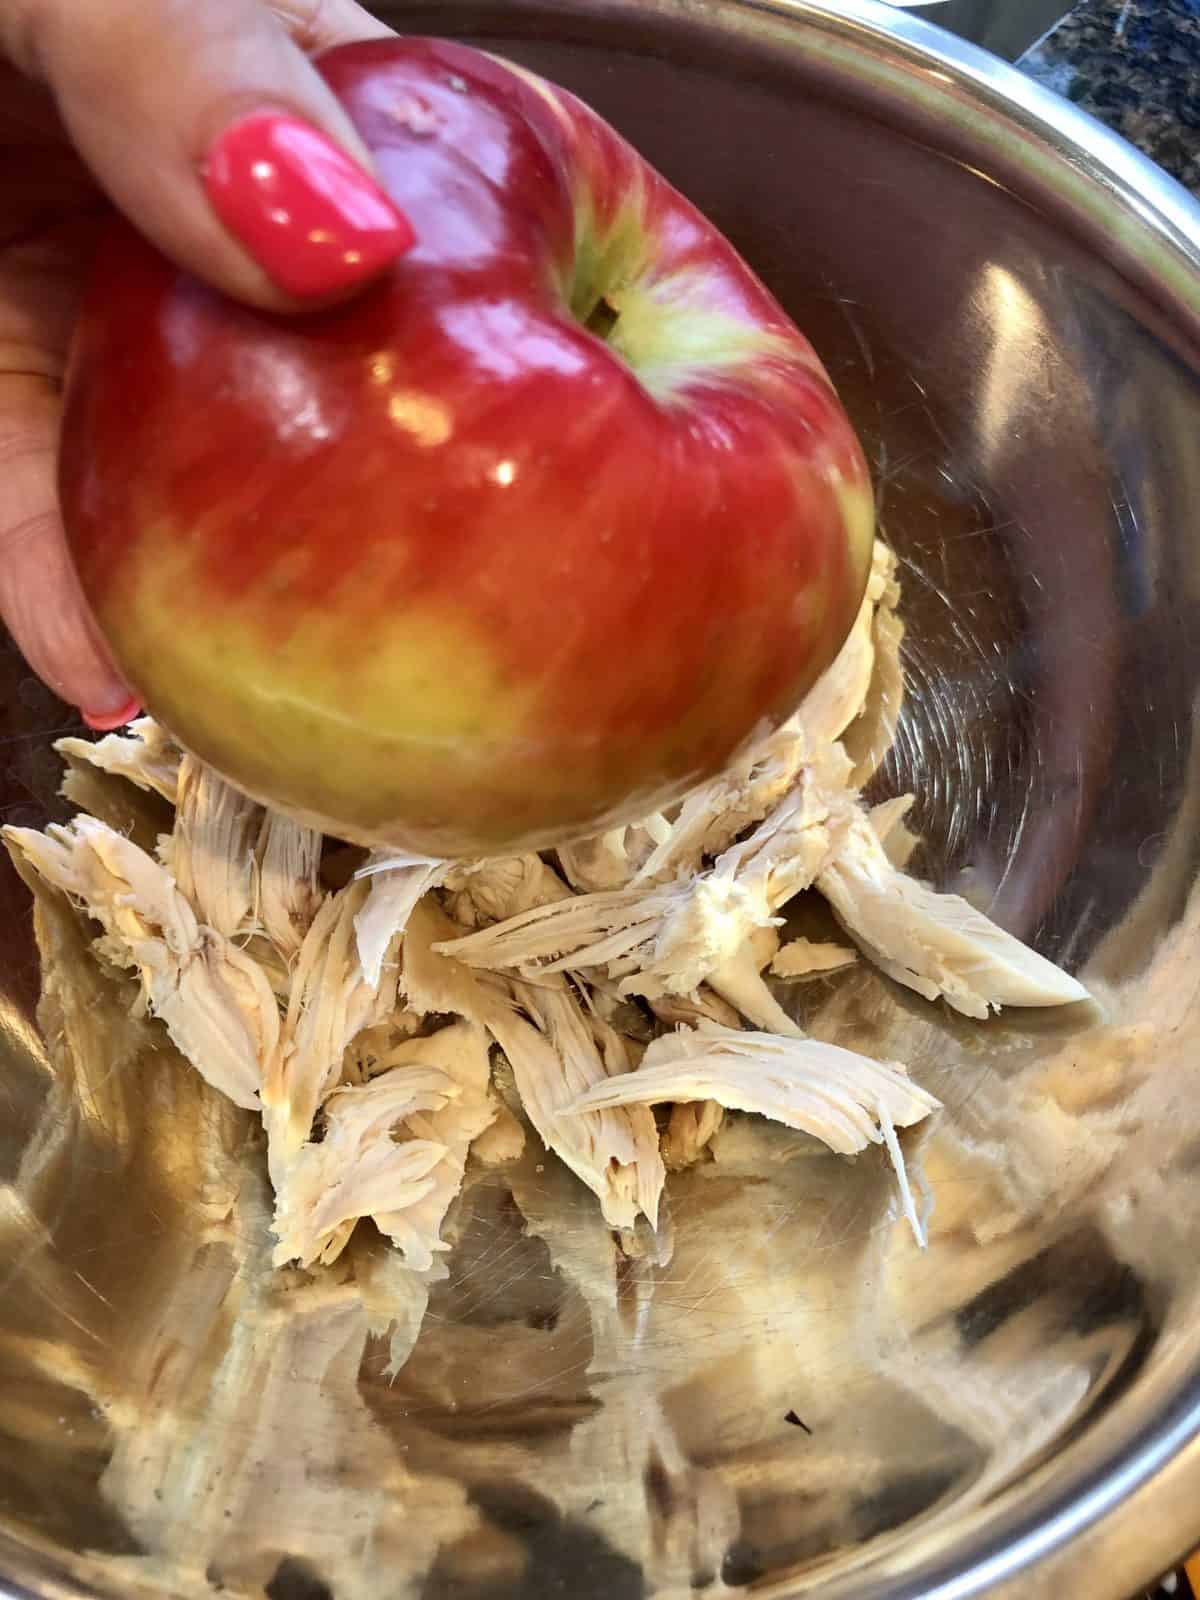 A hand holding a Honeycrisp Apple over a bowl of shredded Chicken